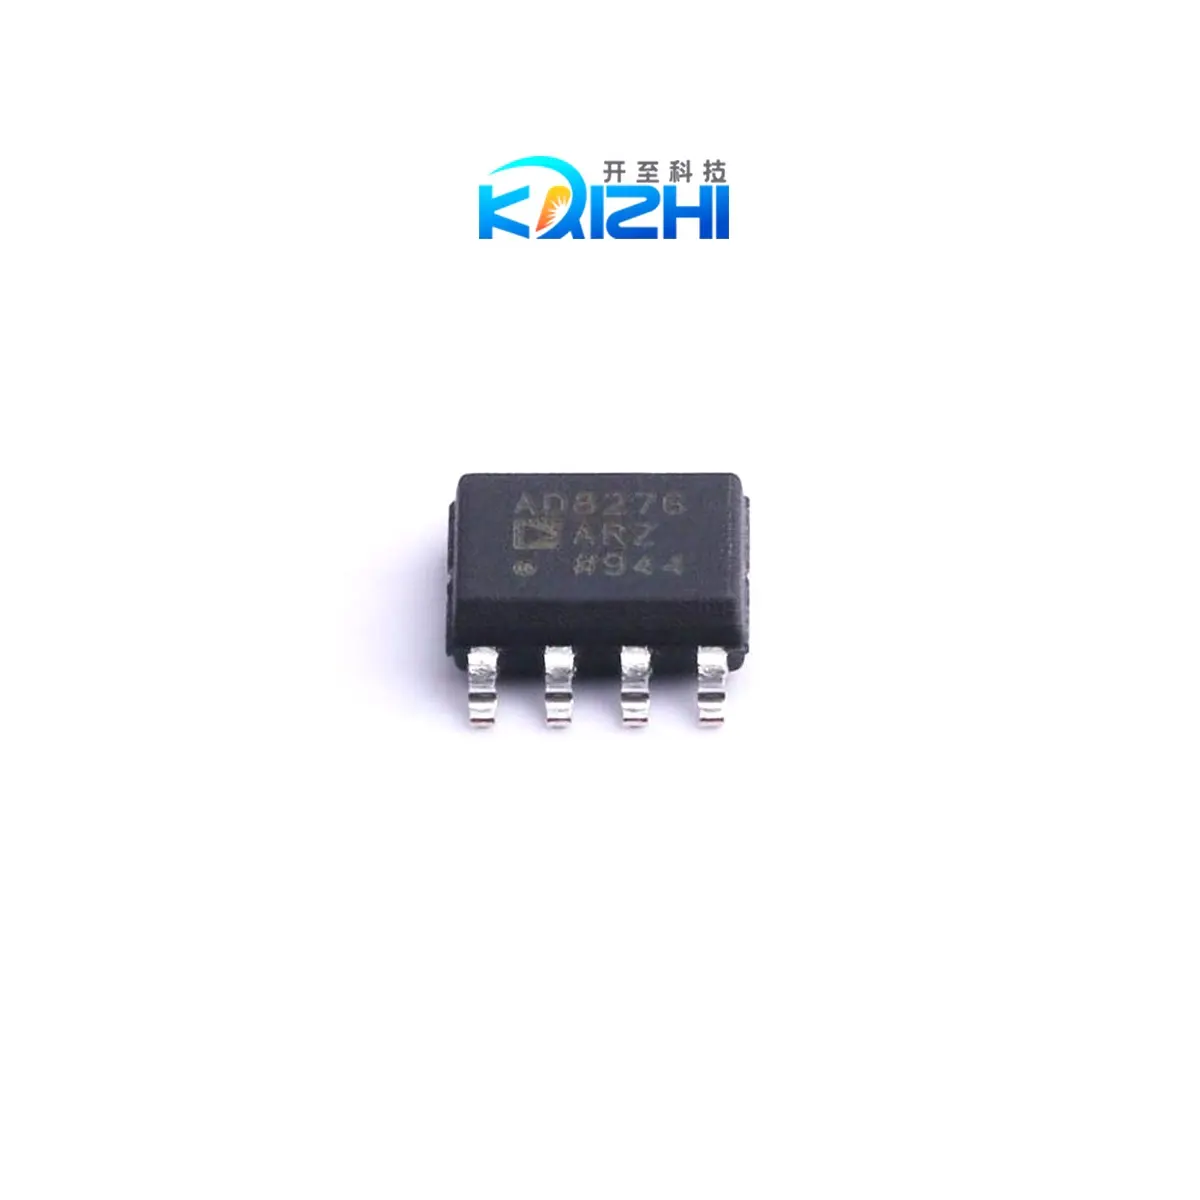 Chip ic ad8276, amplificador linear element SOIC-8 AD8276ARZ-R7